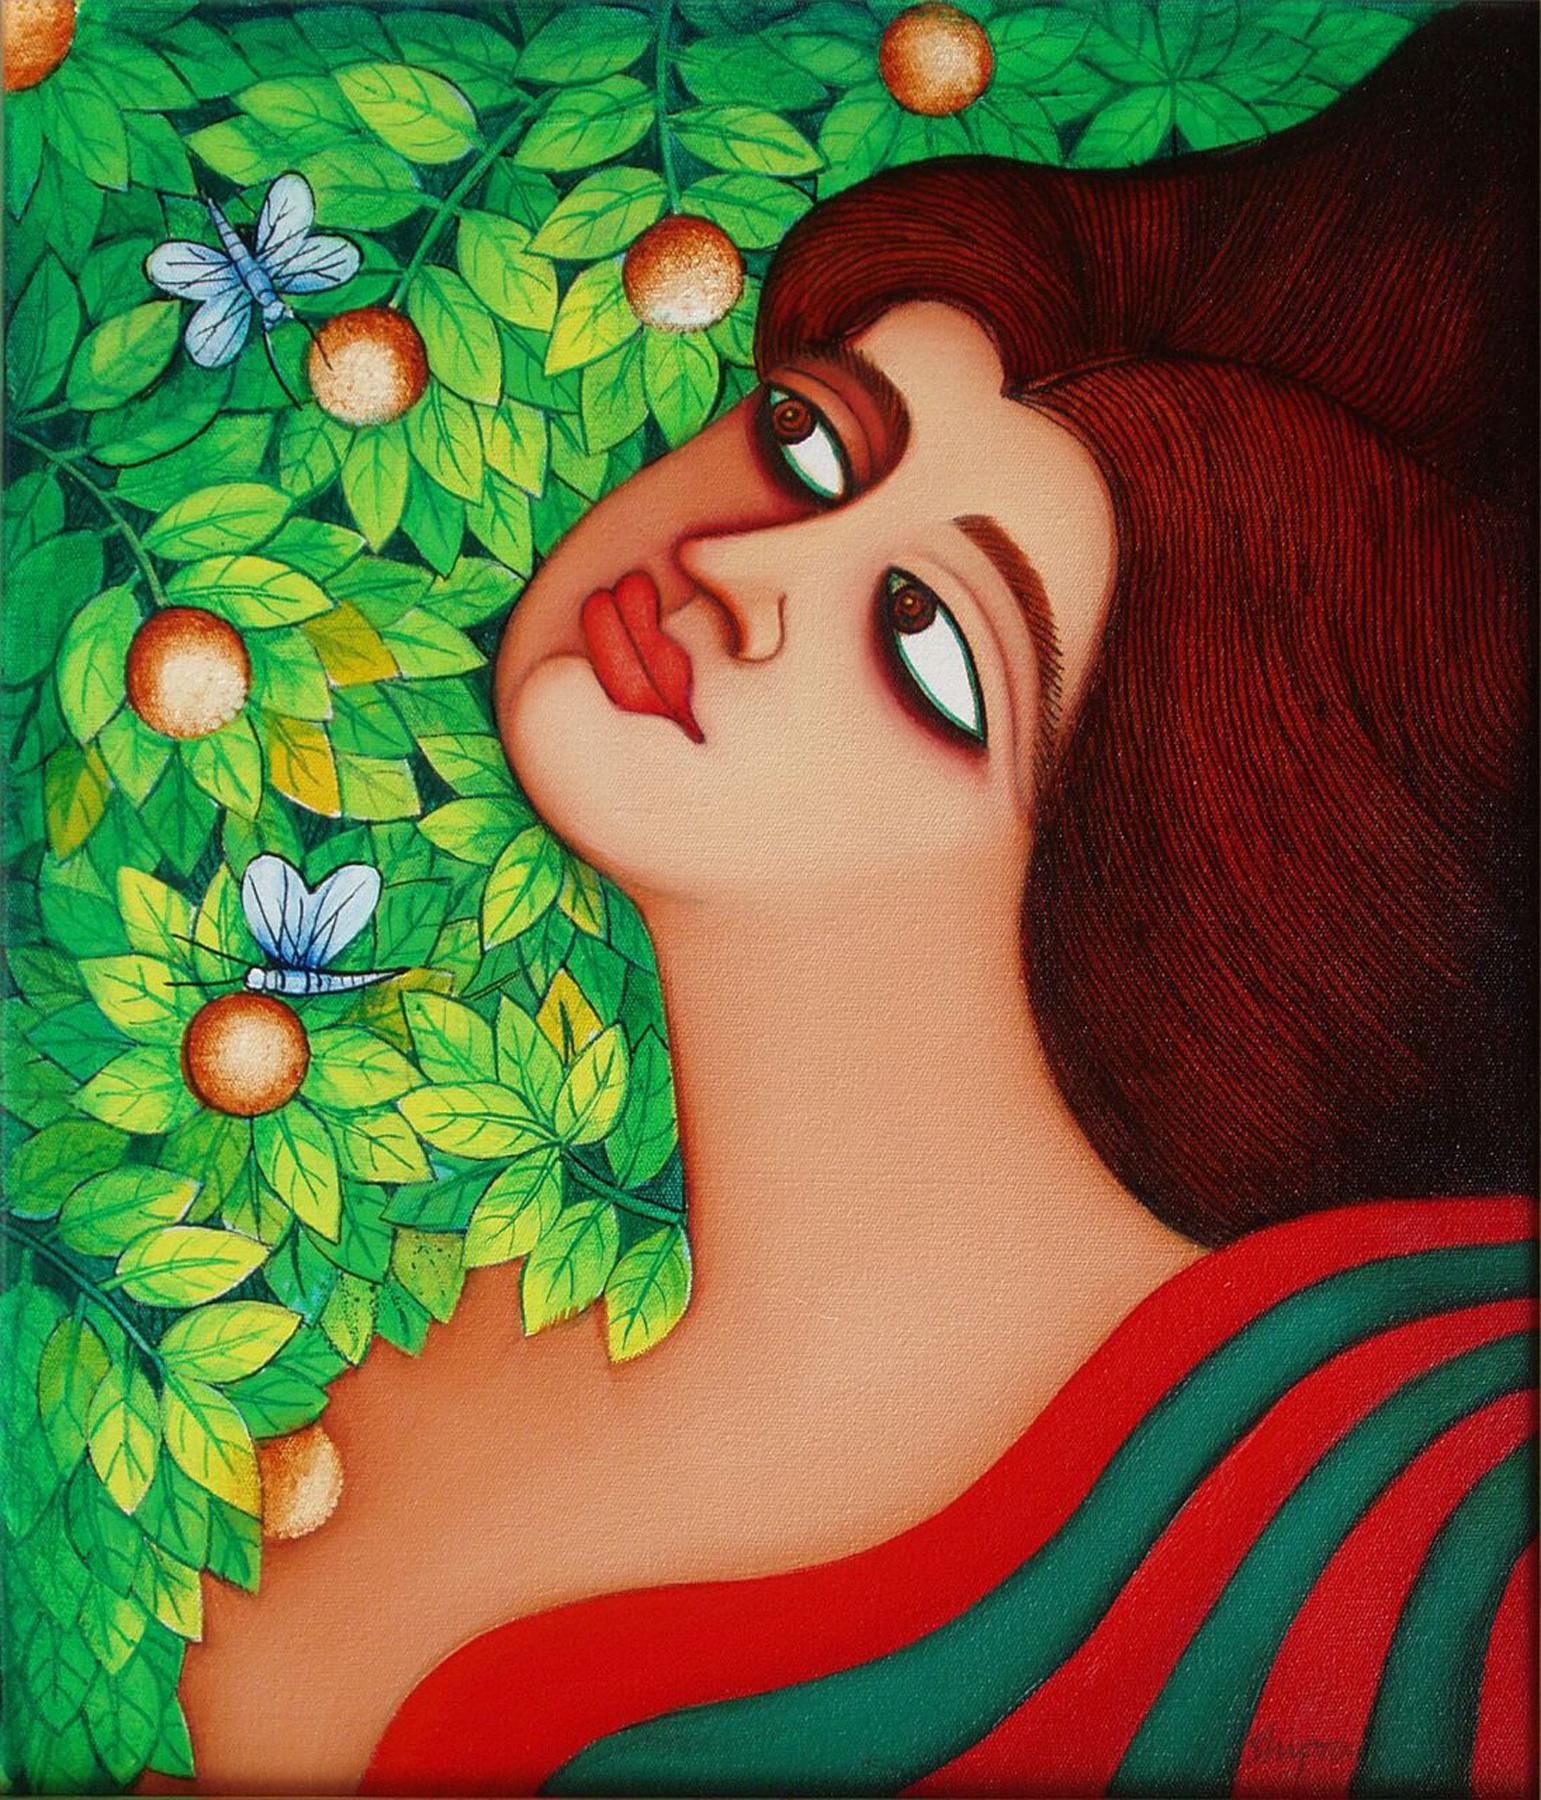 Shipra Bhattacharya Landscape Painting - Large eyes women in flower garden wearing a green, red saree by Indian Artist